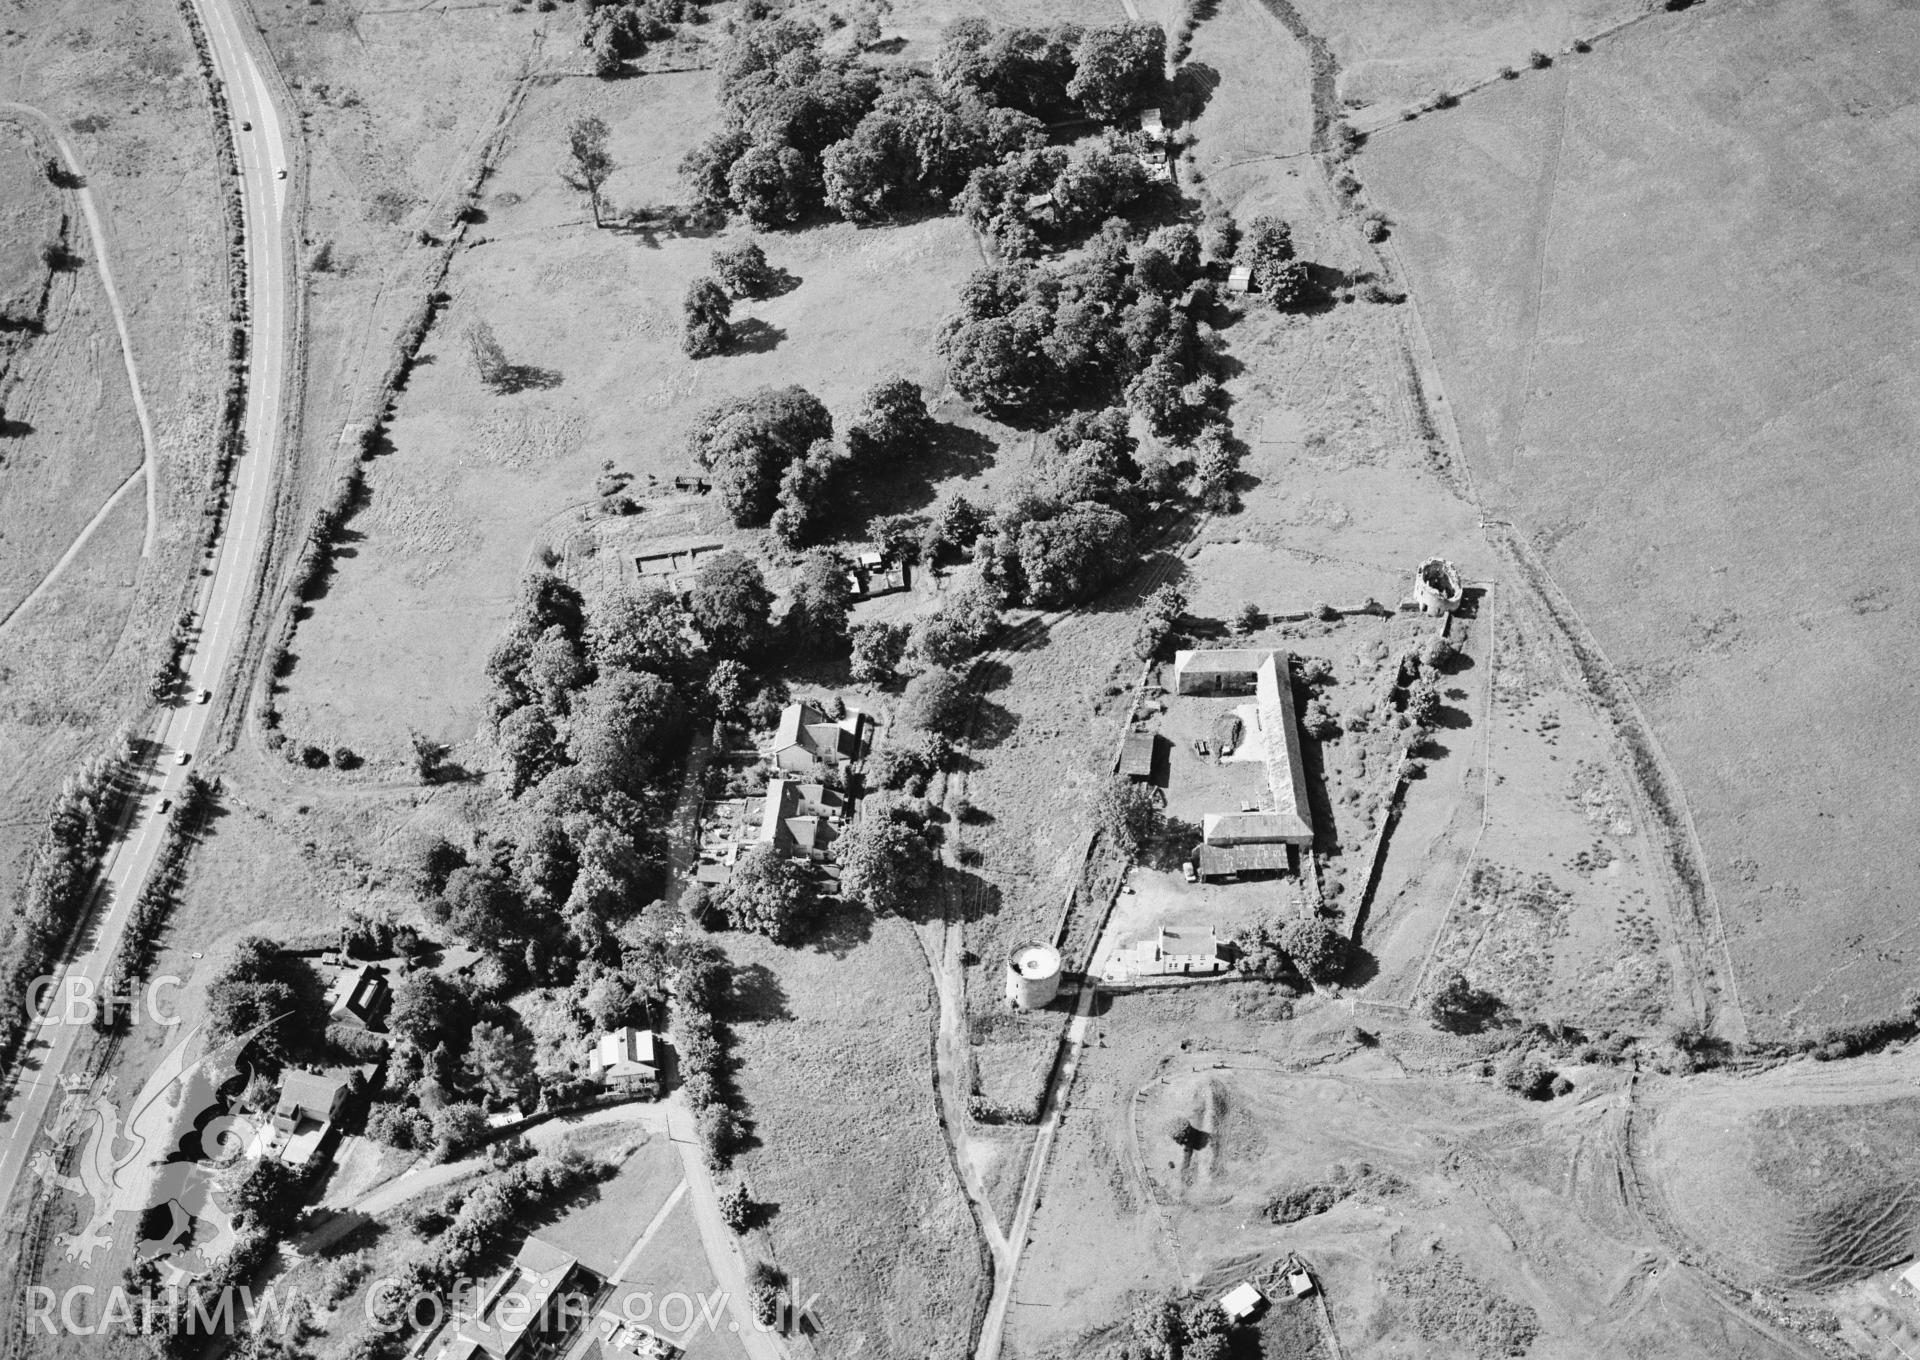 RCAHMW Black and white oblique aerial photograph of Roundhouse Farm, Nantyglo, taken on 24/07/1998 by Toby Driver